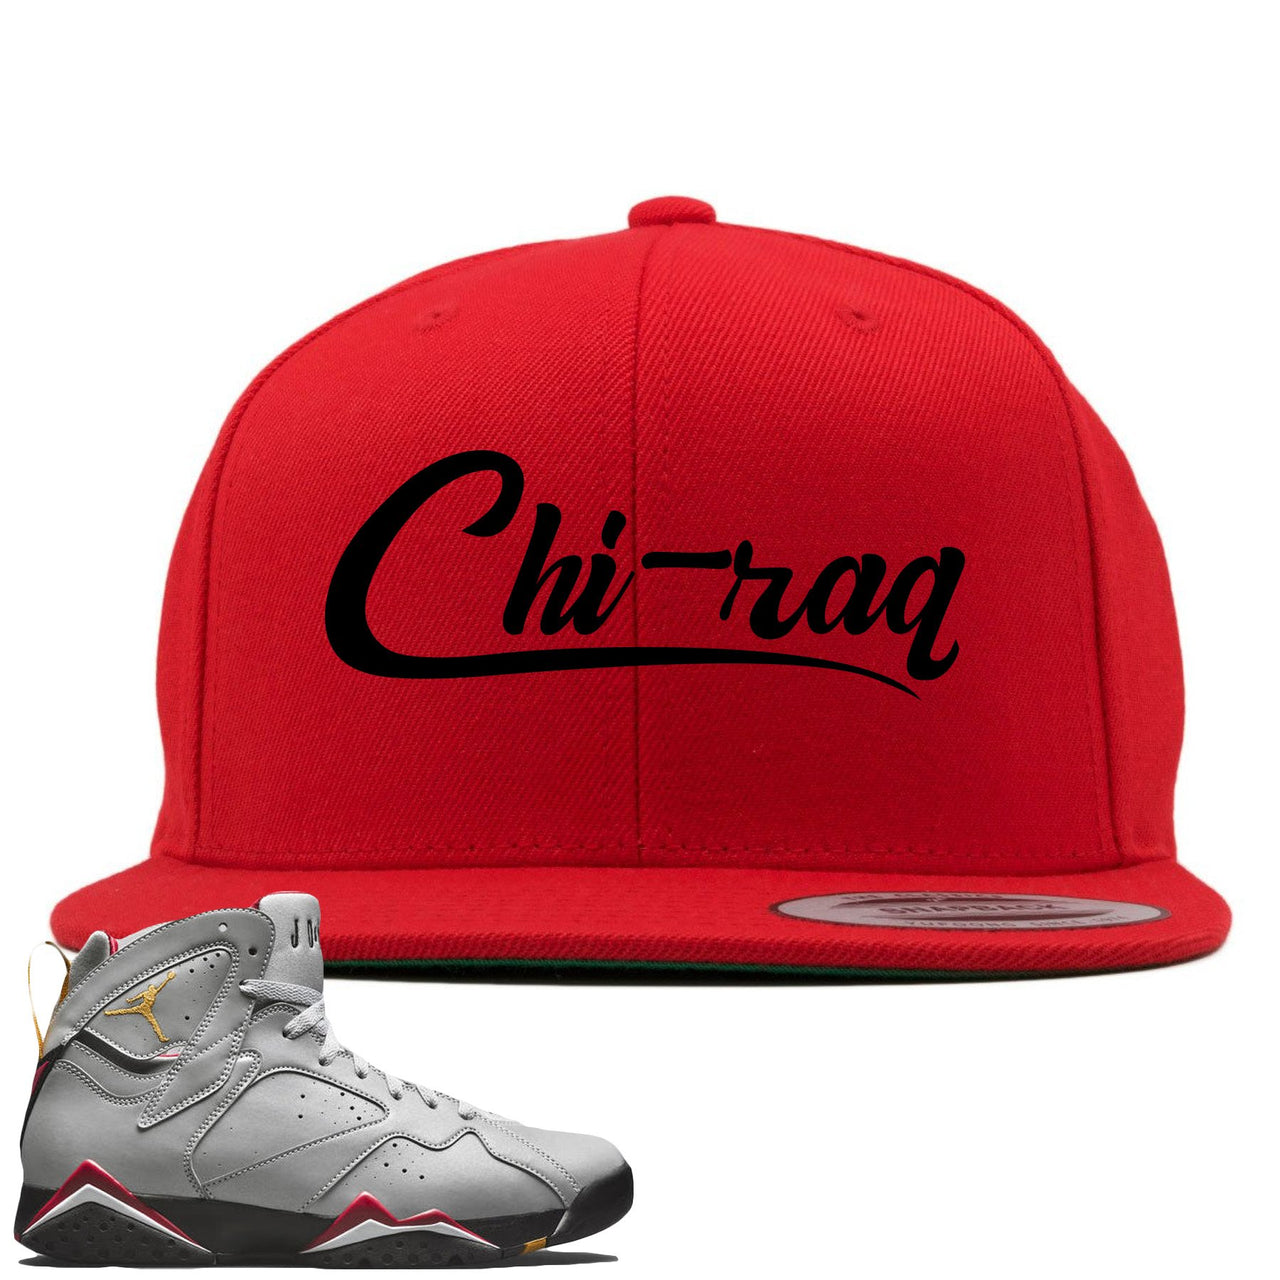 Reflections of a Champion 7s Snapback | Chiraq Script, Red